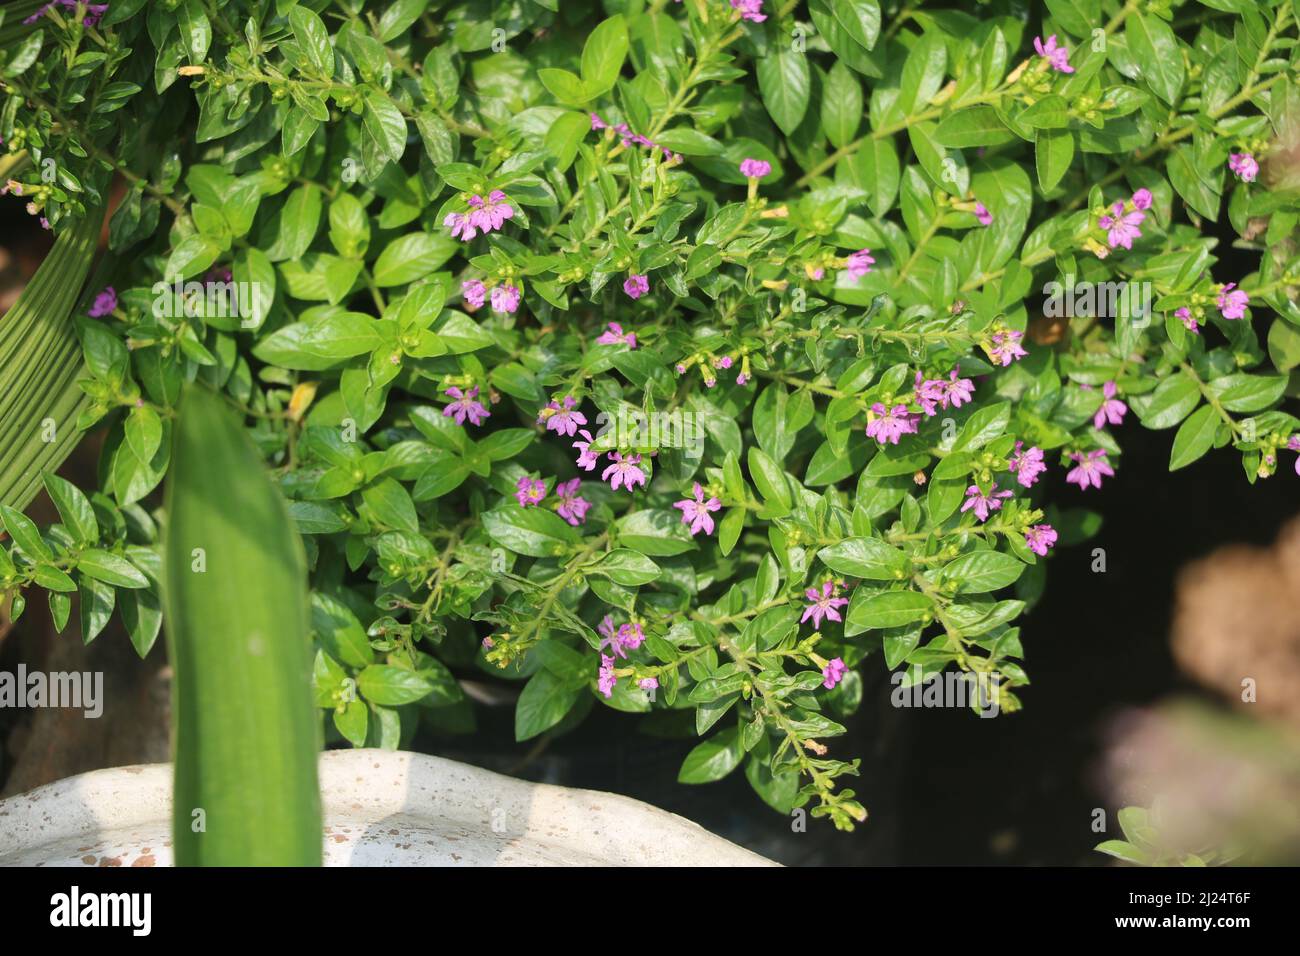 Small pink flower, It is beautiful violet color panika plant. This small plant seems altime as like water.Its flower is very small and attractive. Stock Photo